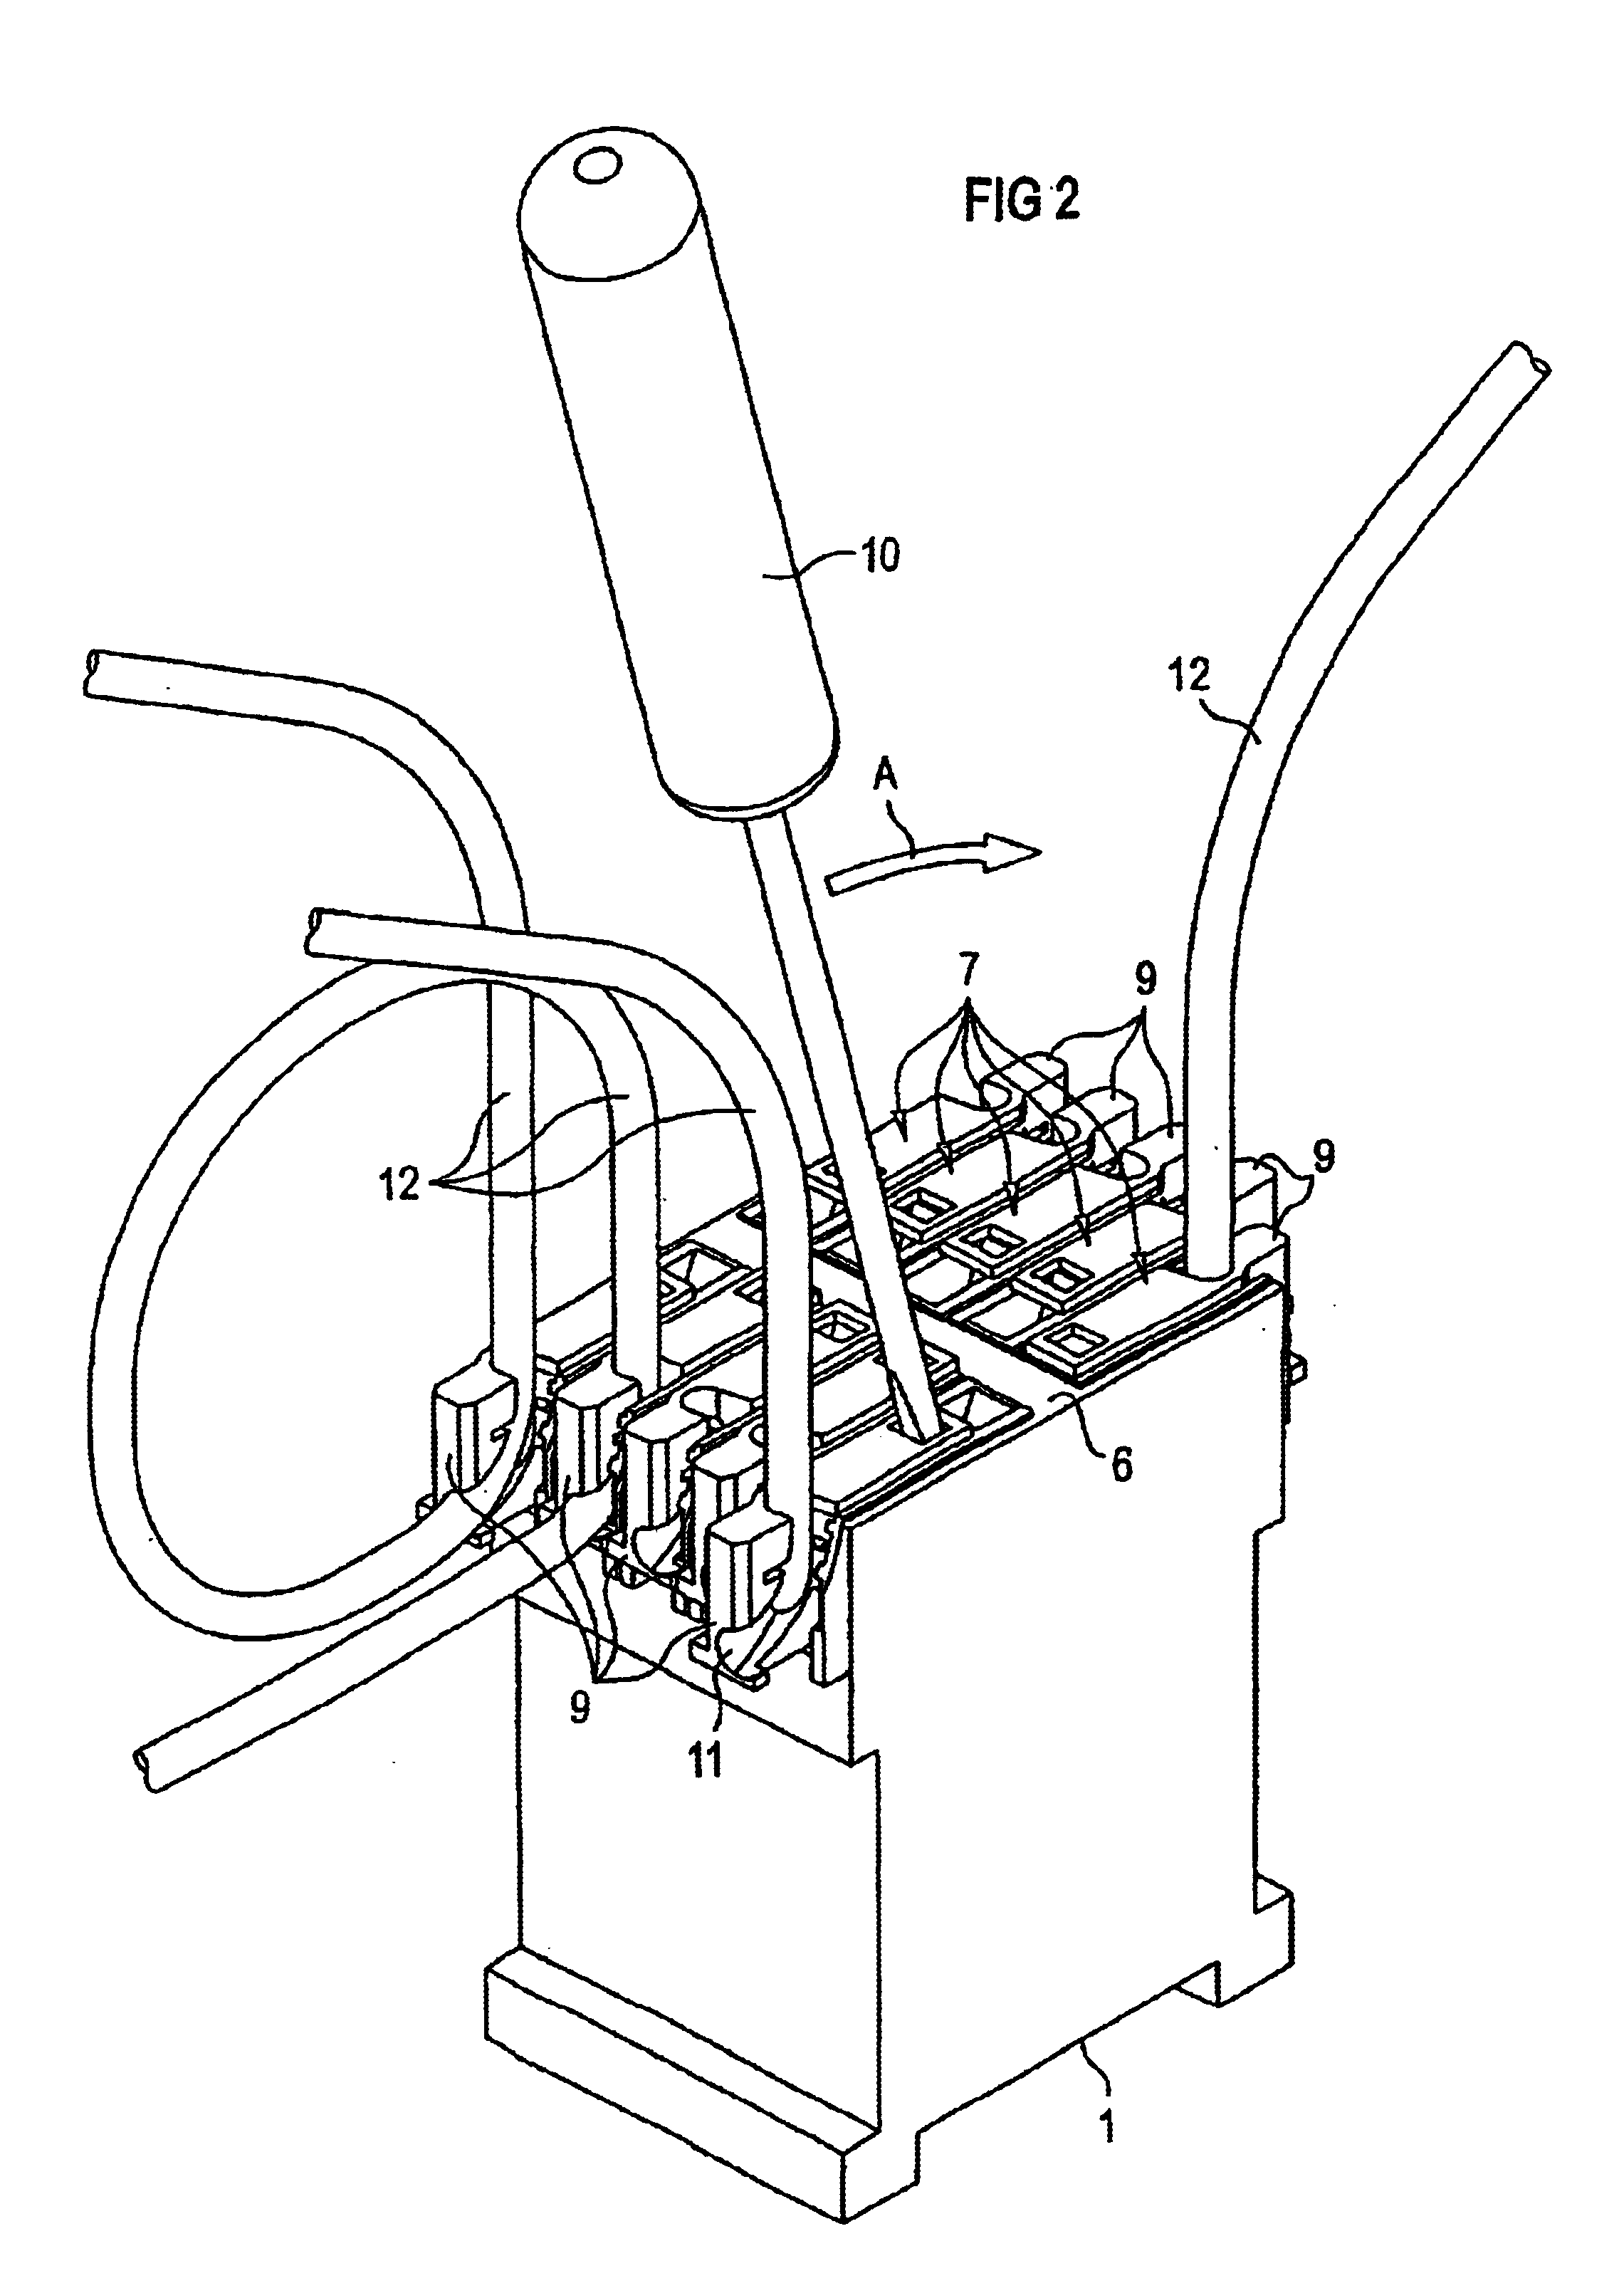 Electrical unit with a connector for a loop through conductor